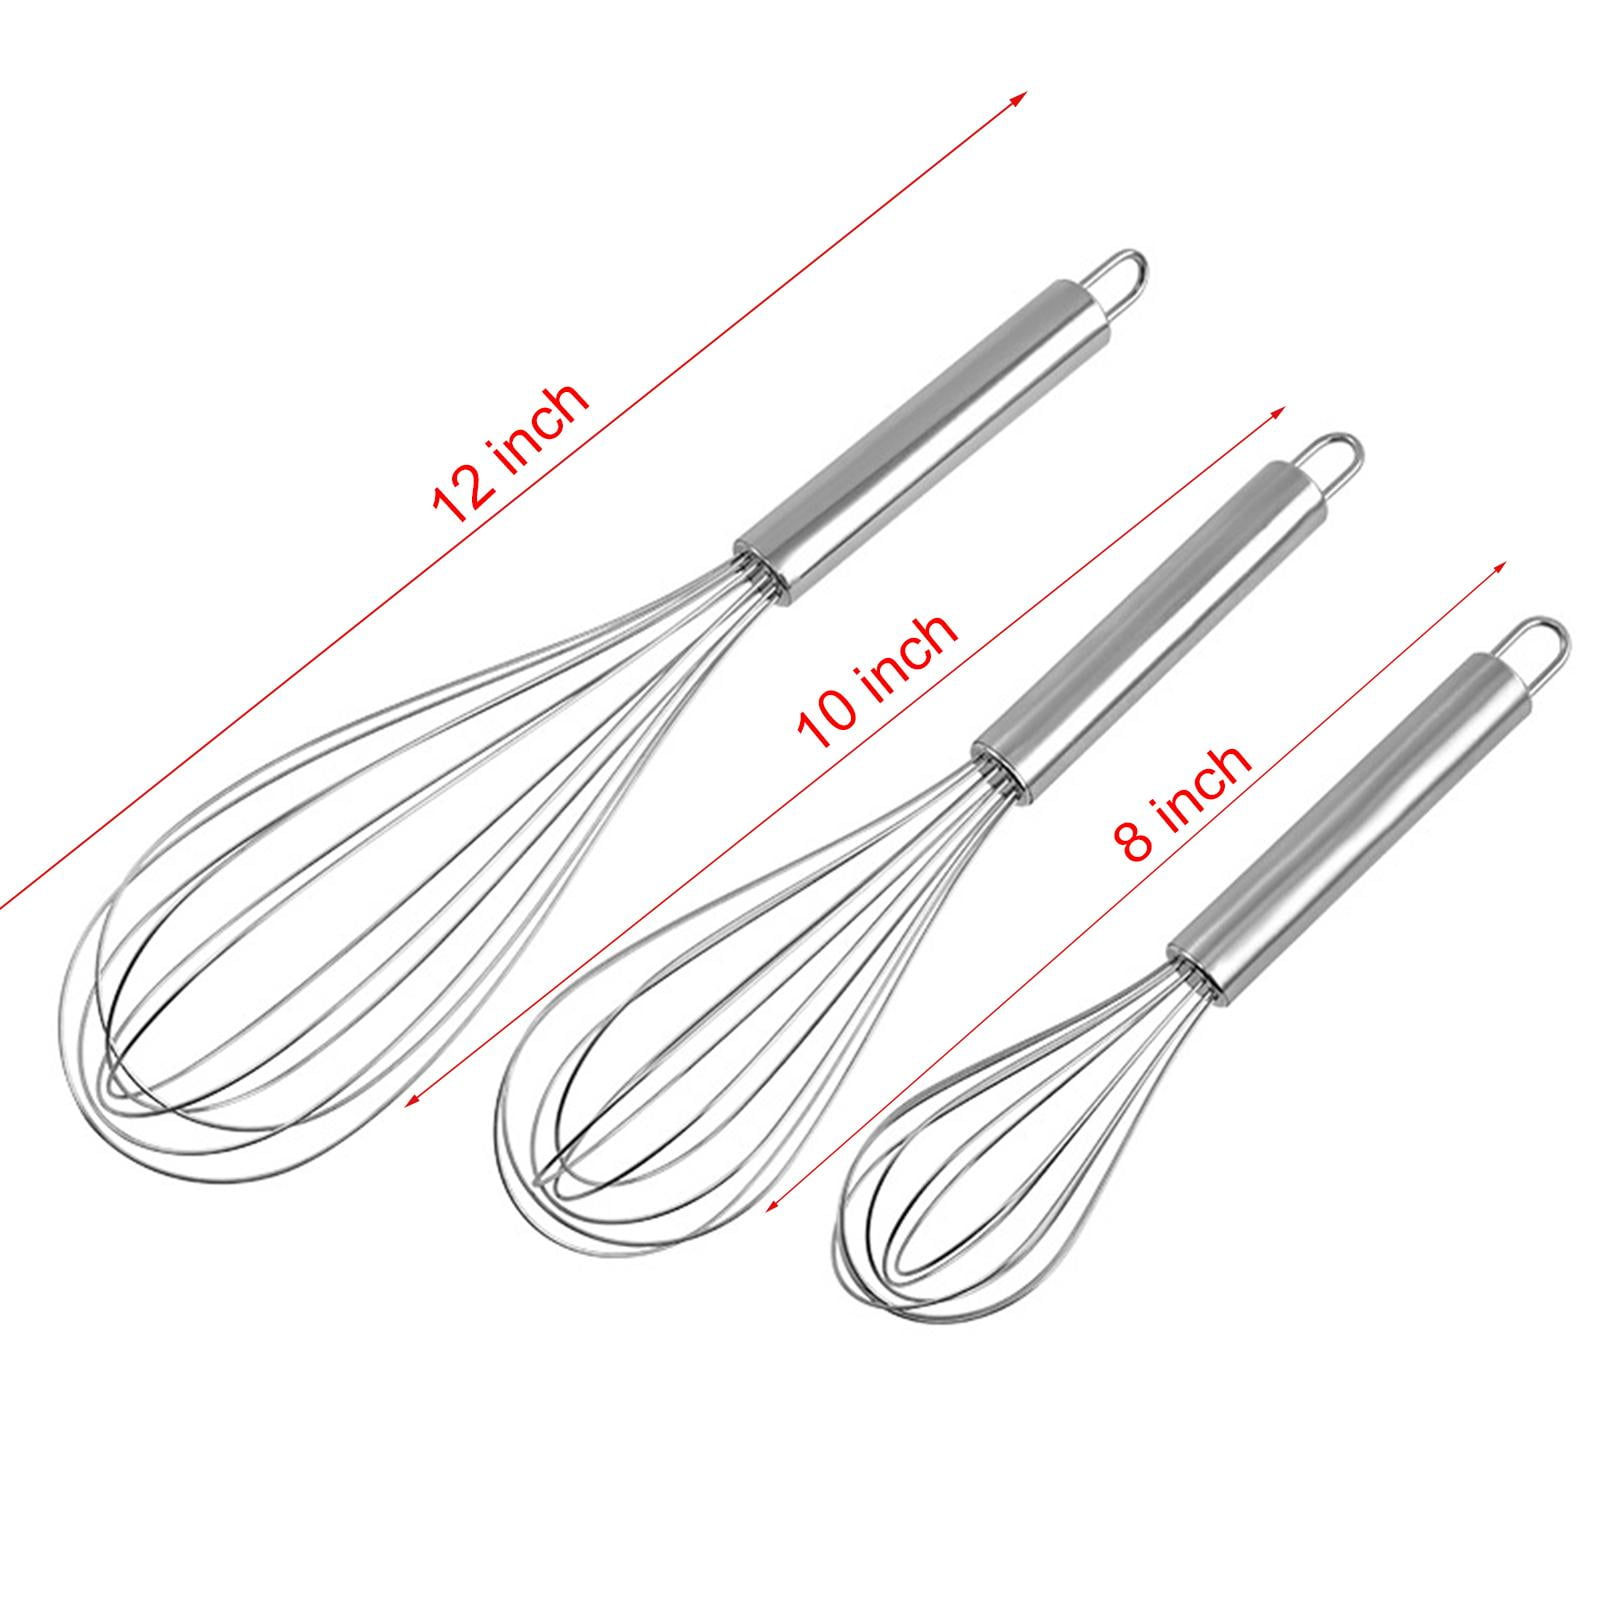 ReaNea Rainbow Whisk Set Pack of 3 Stainless Steel 8 10 12 Whisks for  Cooking, Beater, Kitchen Wire Wisk